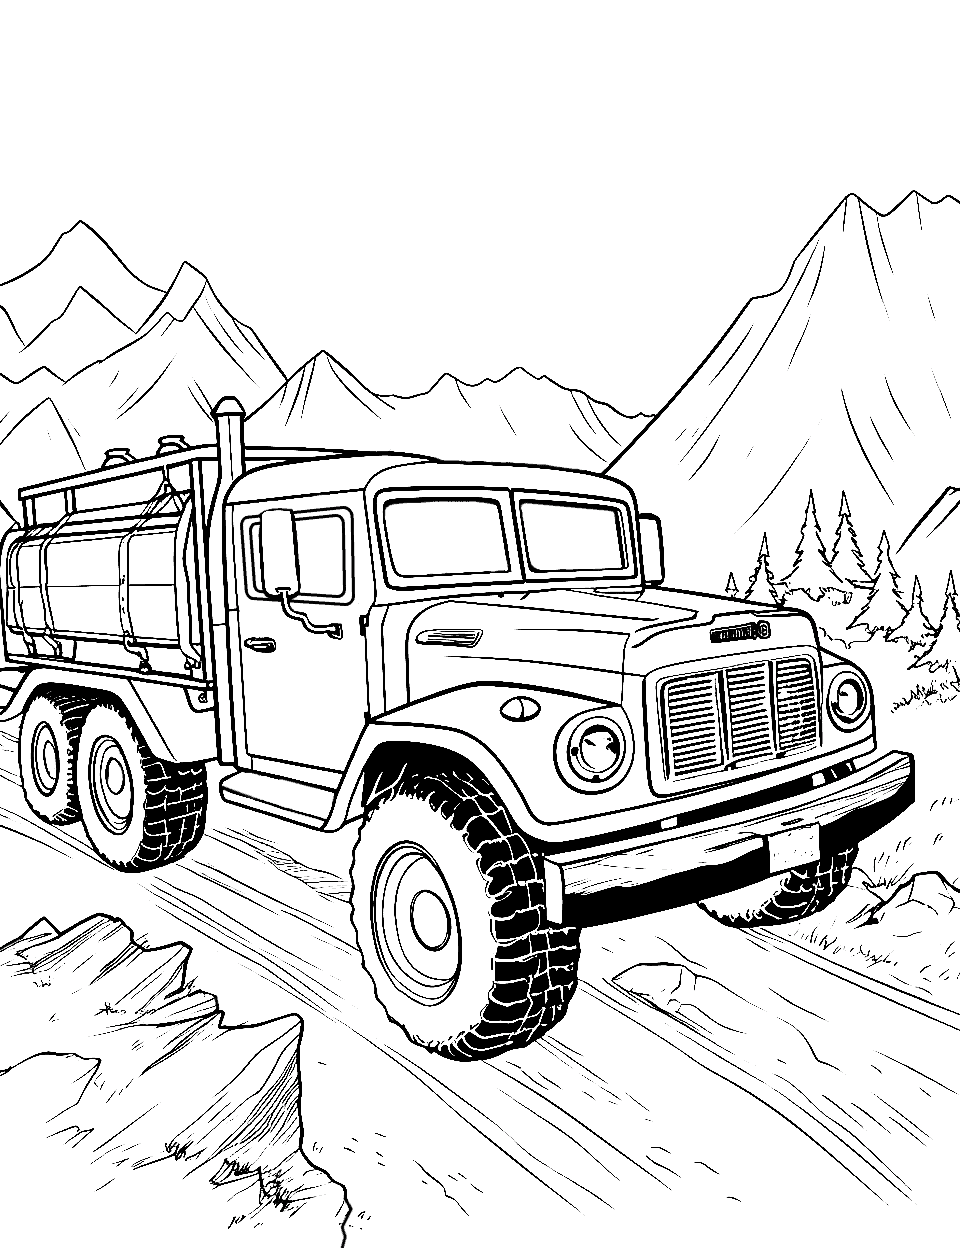 Off-Road Journey Coloring Page - A truck navigating through a simple, rugged off-road trail.